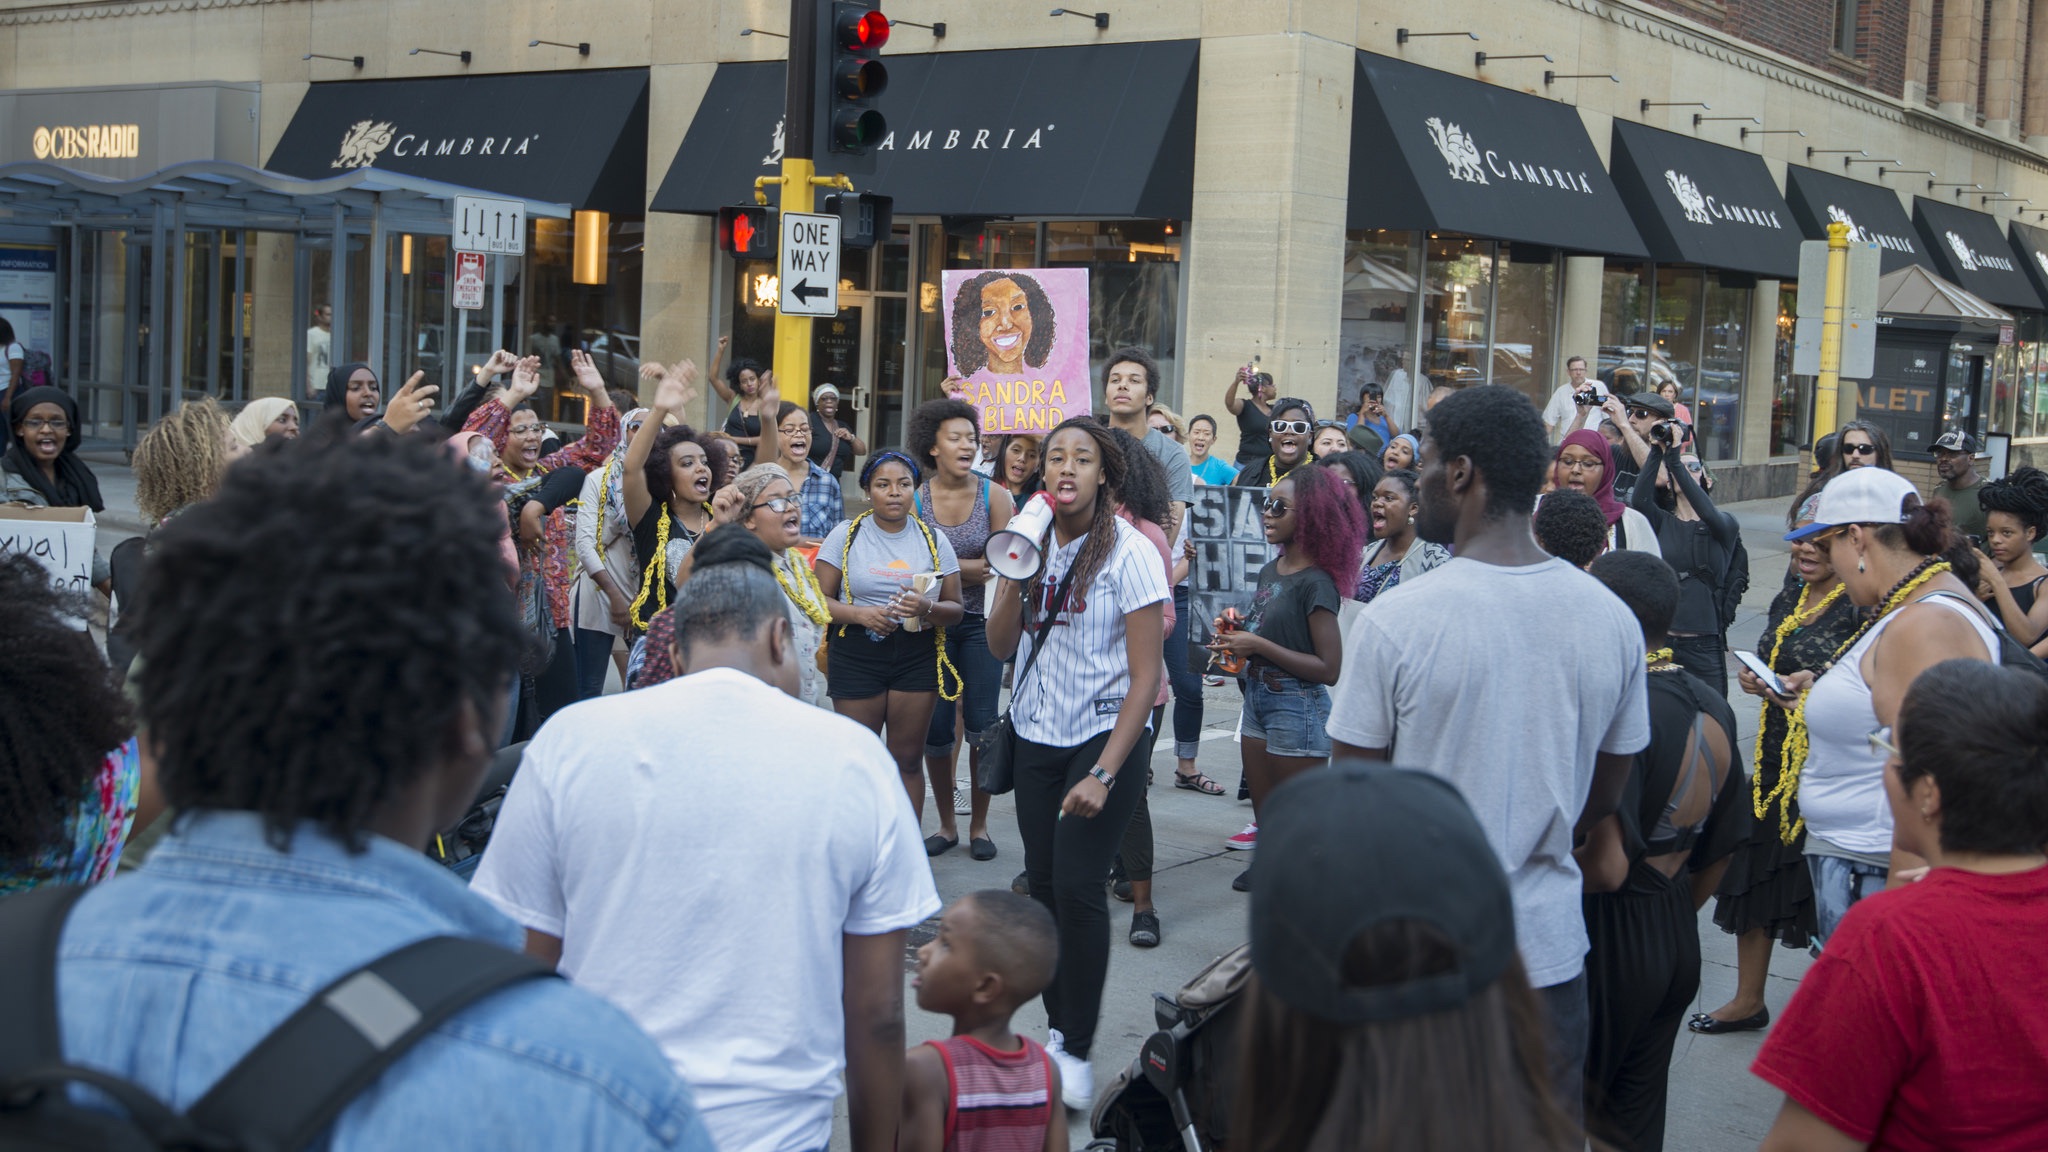 March to honor Sandra Bland and protest deaths of black women in police custody